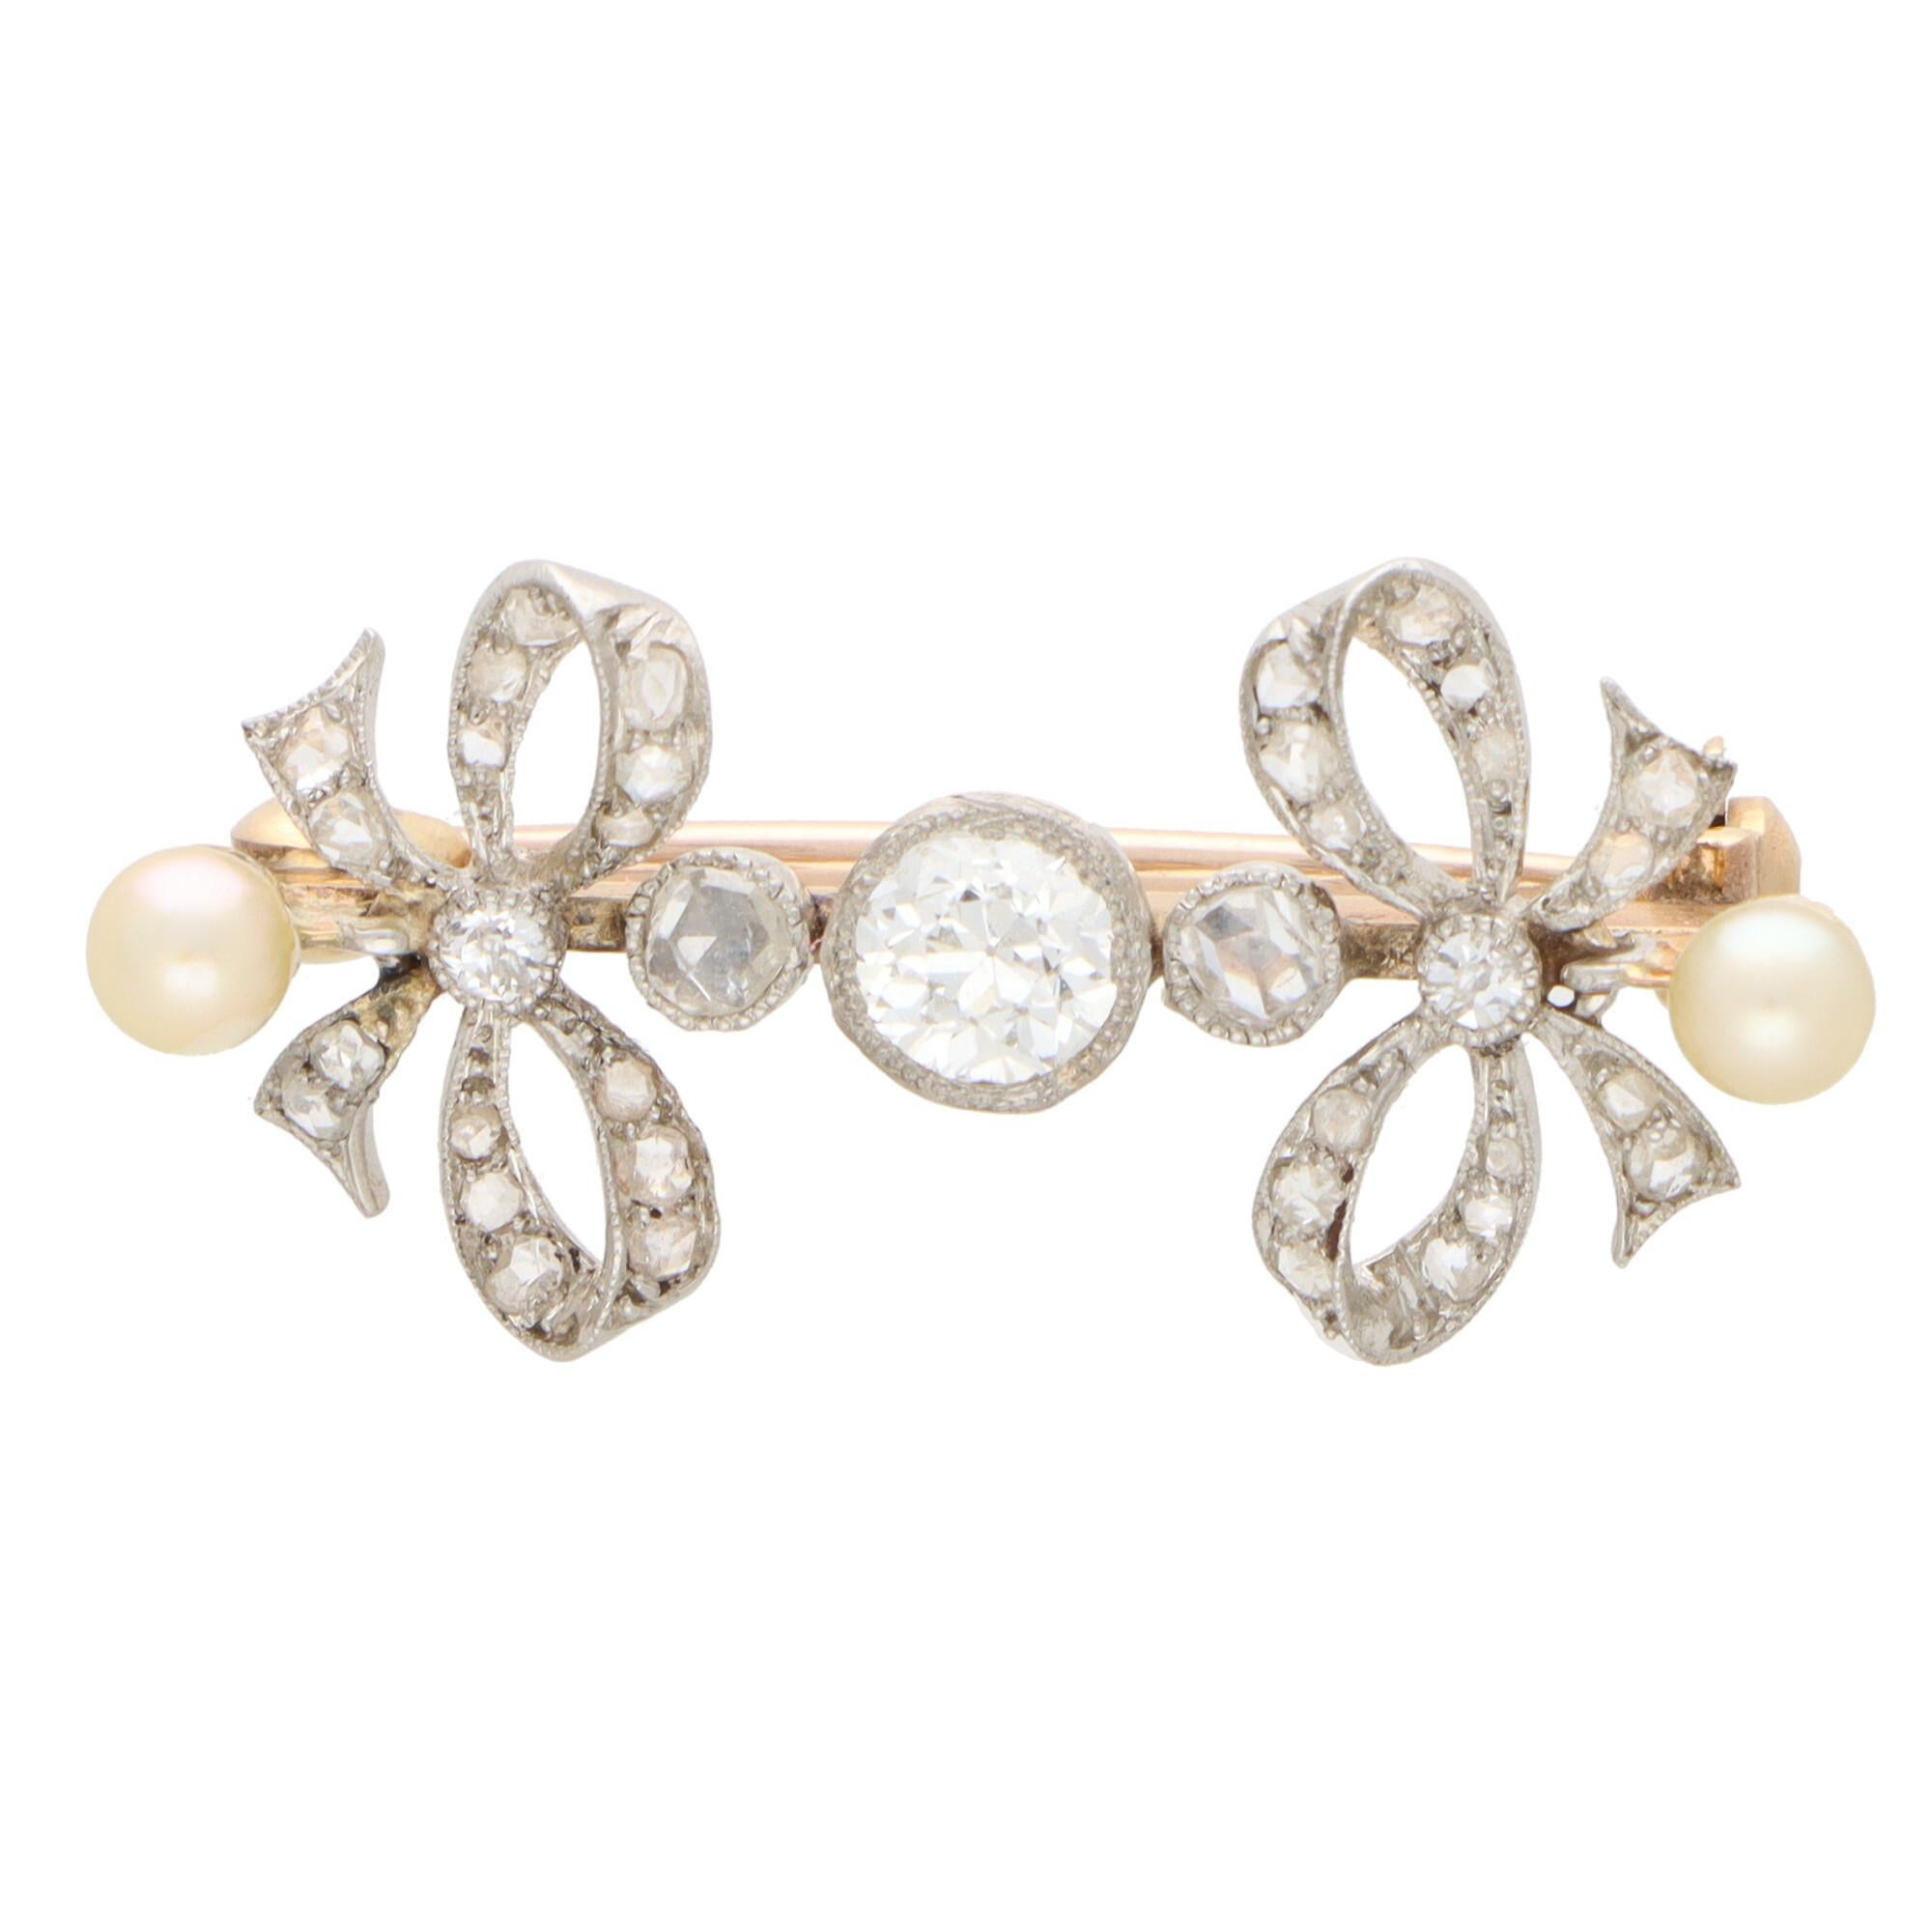 Women's or Men's Art Deco Pearl and Old Cut Diamond Bow Pin Brooch in Platinum and Gold